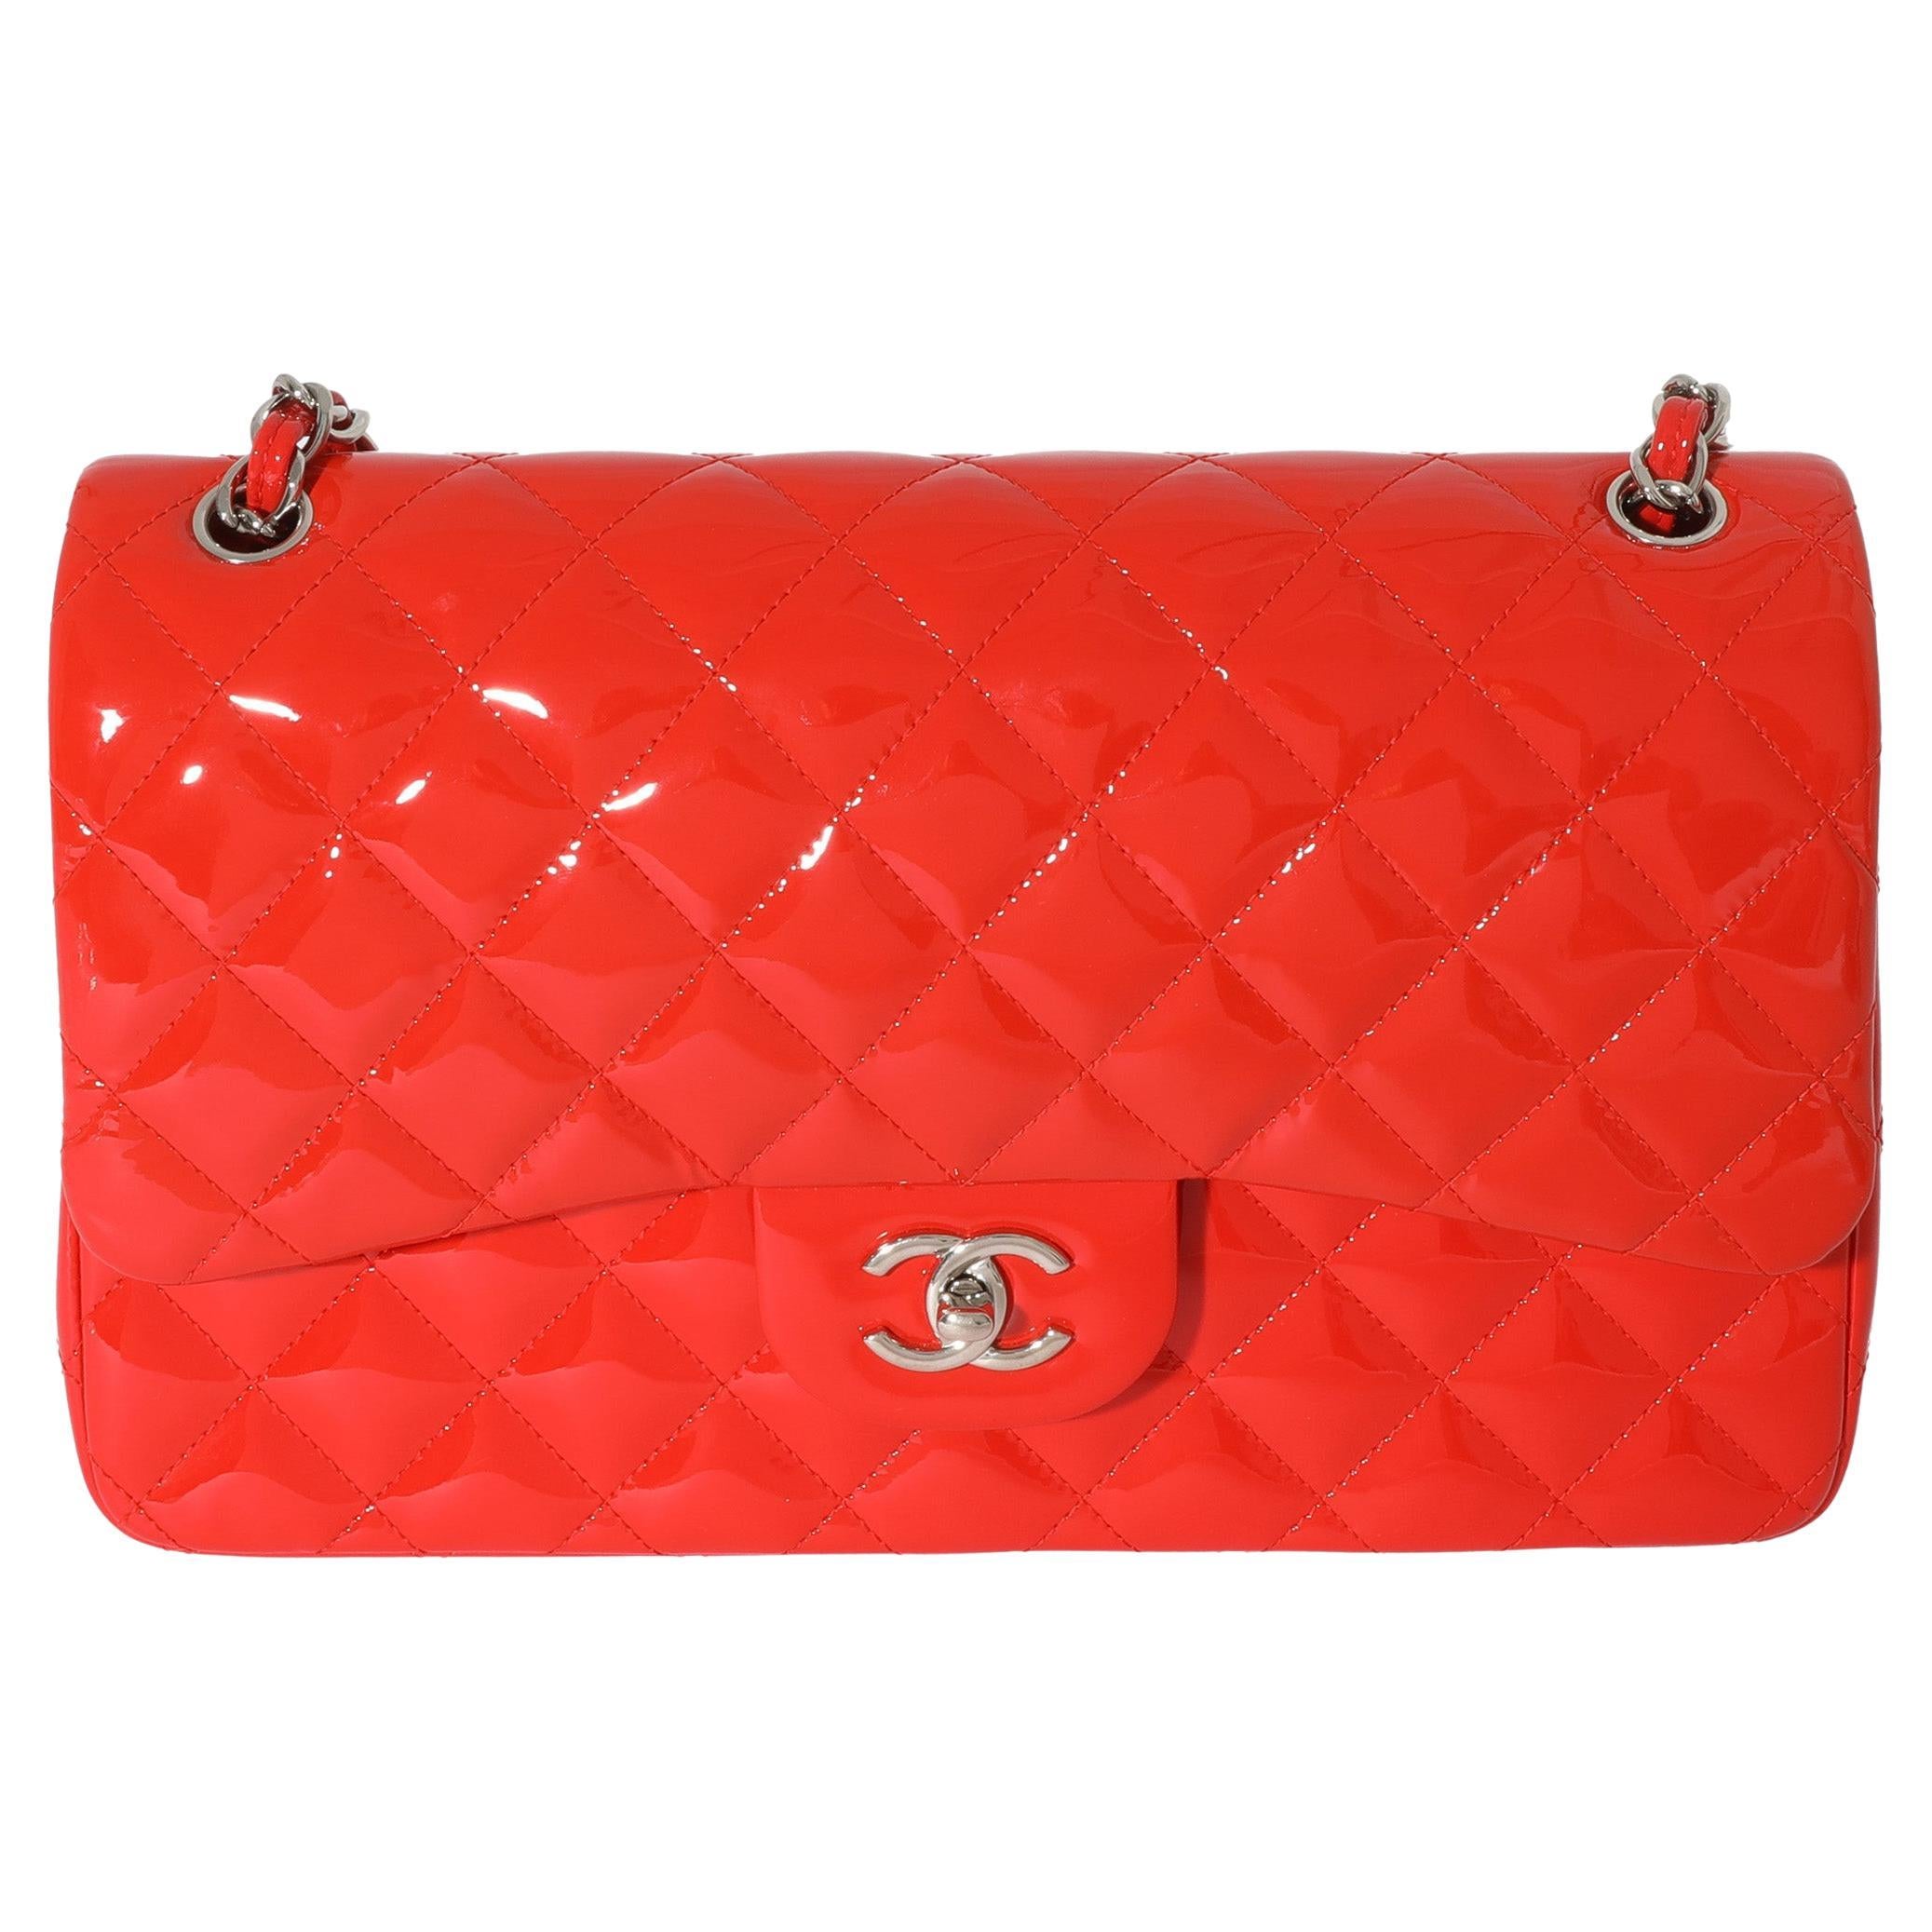 Chanel Orange Quilted Patent Leather Jumbo Double Flap Bag For Sale